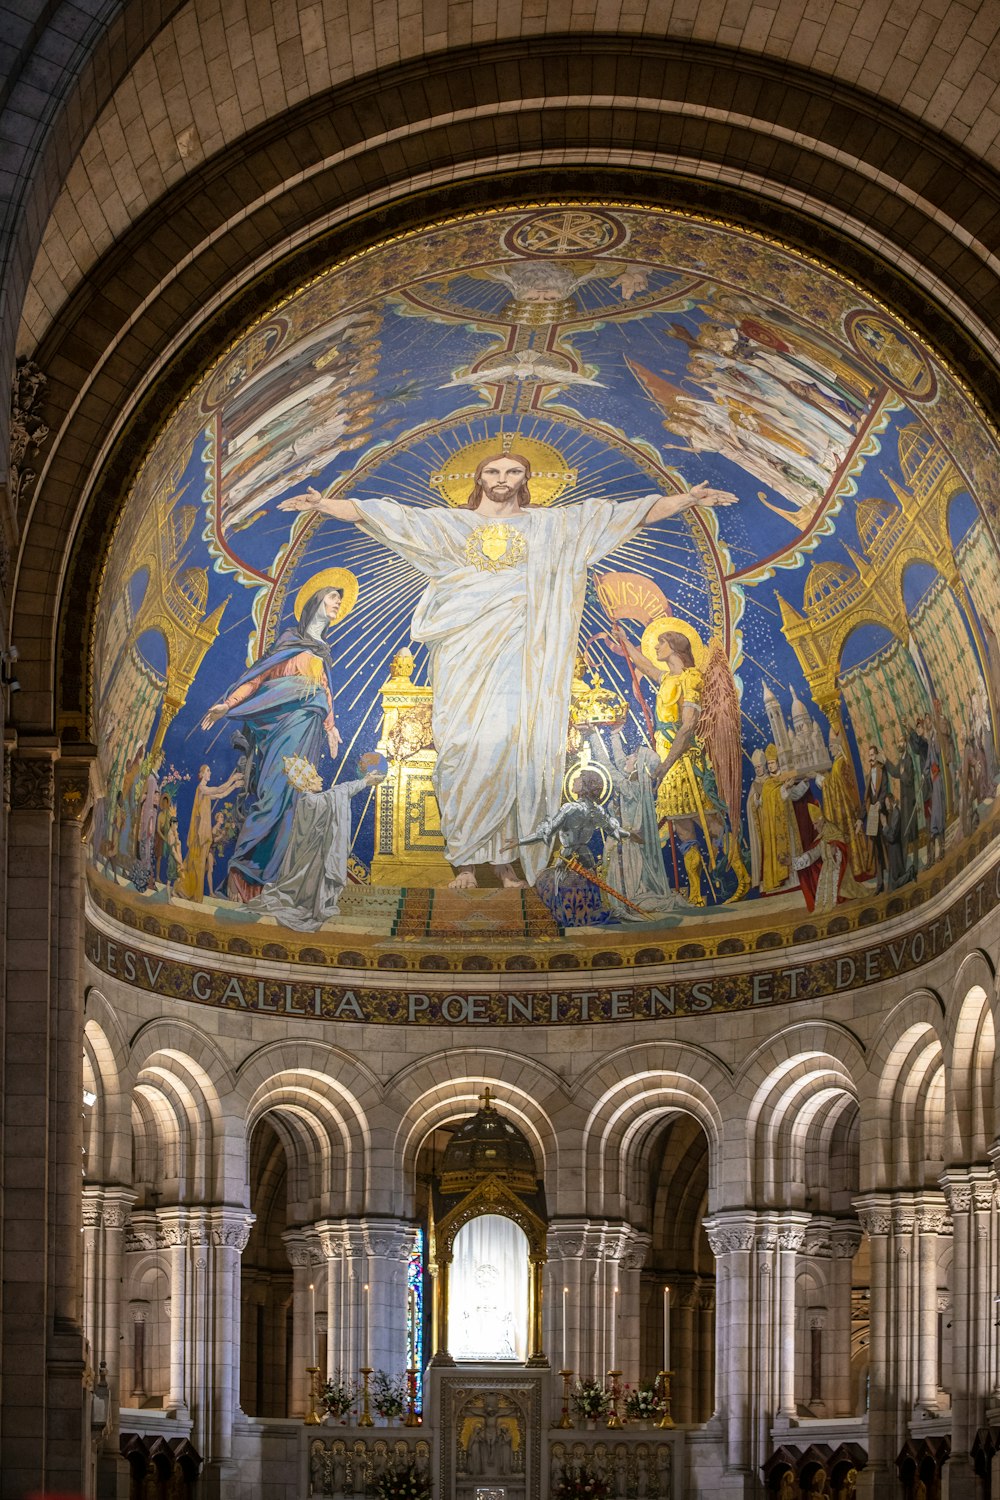 inside cathedral strcuture